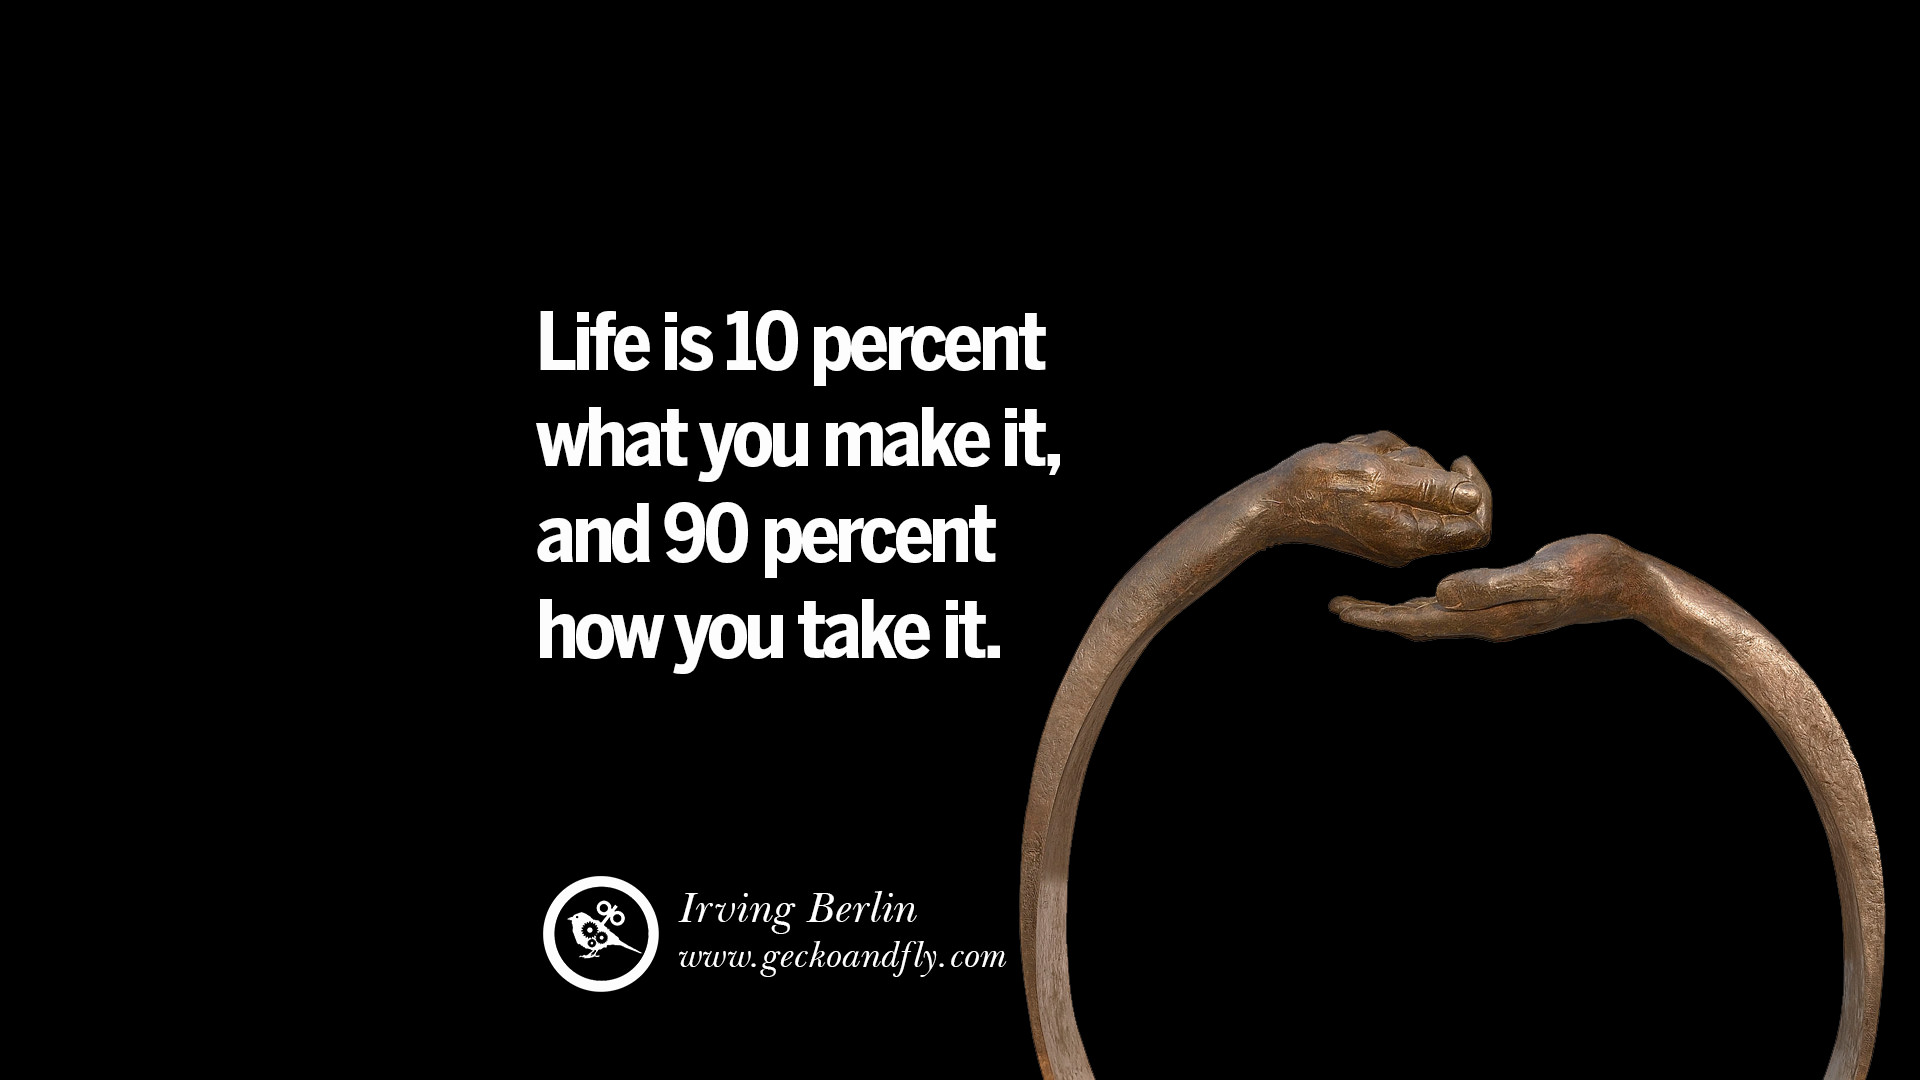 Inspiring Quotes about Life Life is 10 percent what you make it and 90 percent